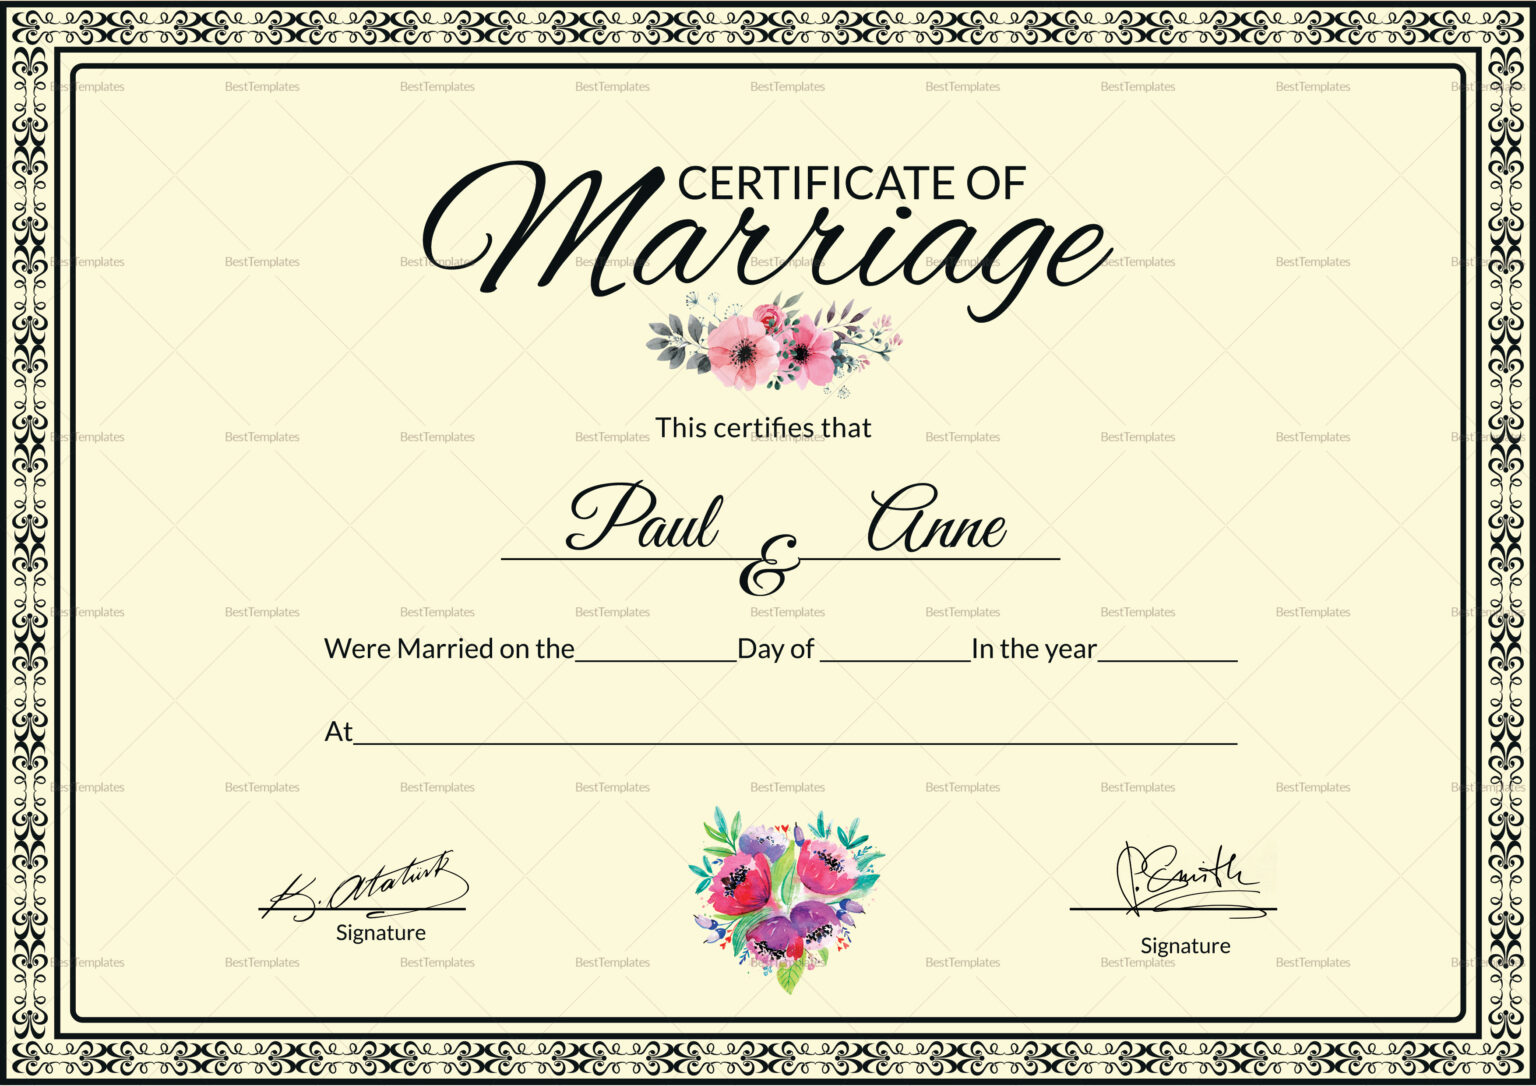 marriage-certificate-template-with-regard-to-certificate-of-marriage-template-professional